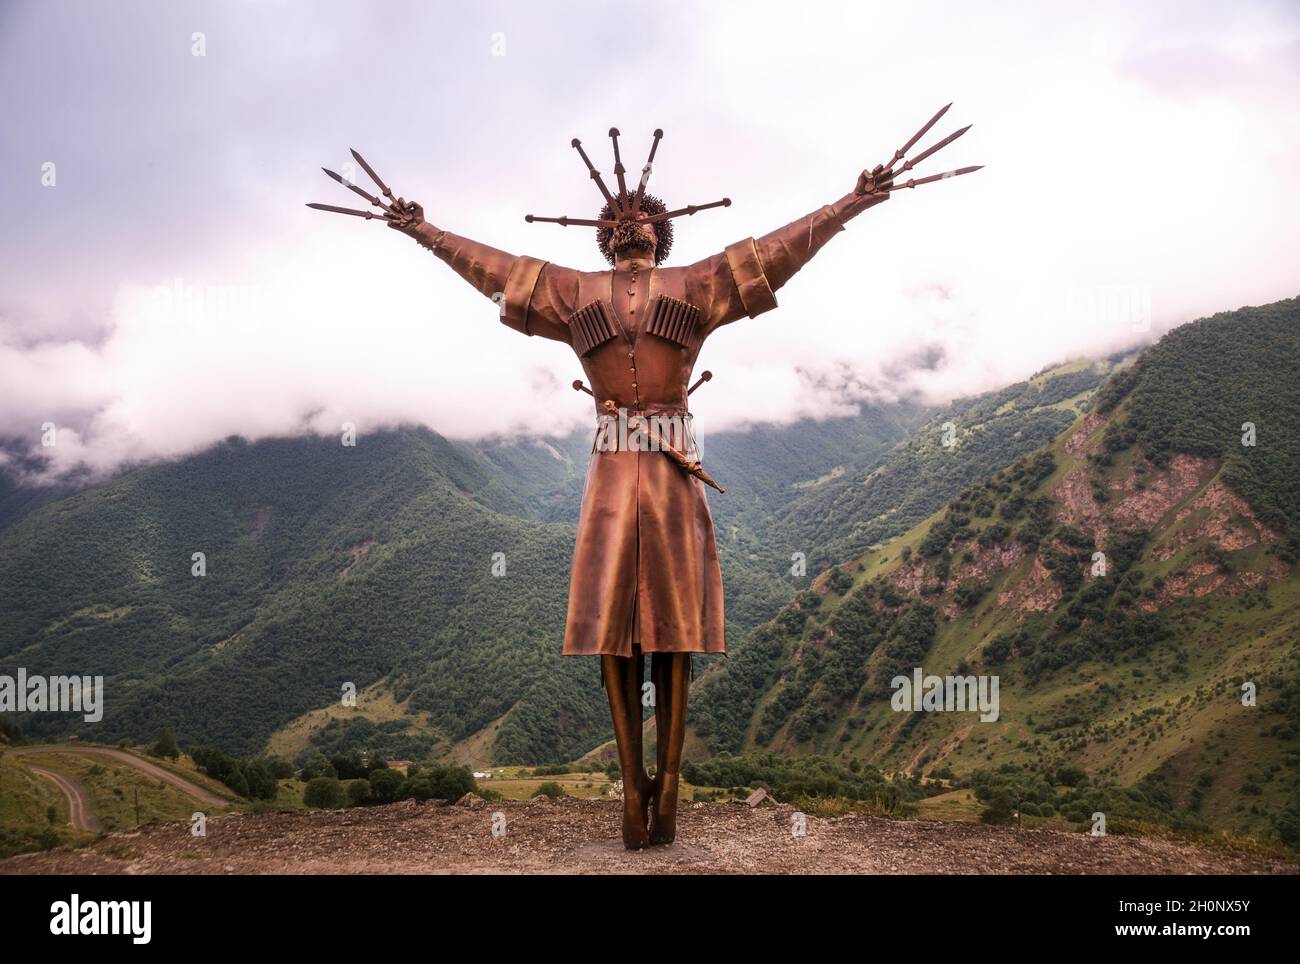 VERKHNIY ZGID, RUSSIA - 07 25 2021: Newly built Dance With Daggers monument towering along with high mountain peaks in Verkhny Zgid village. Monument Stock Photo